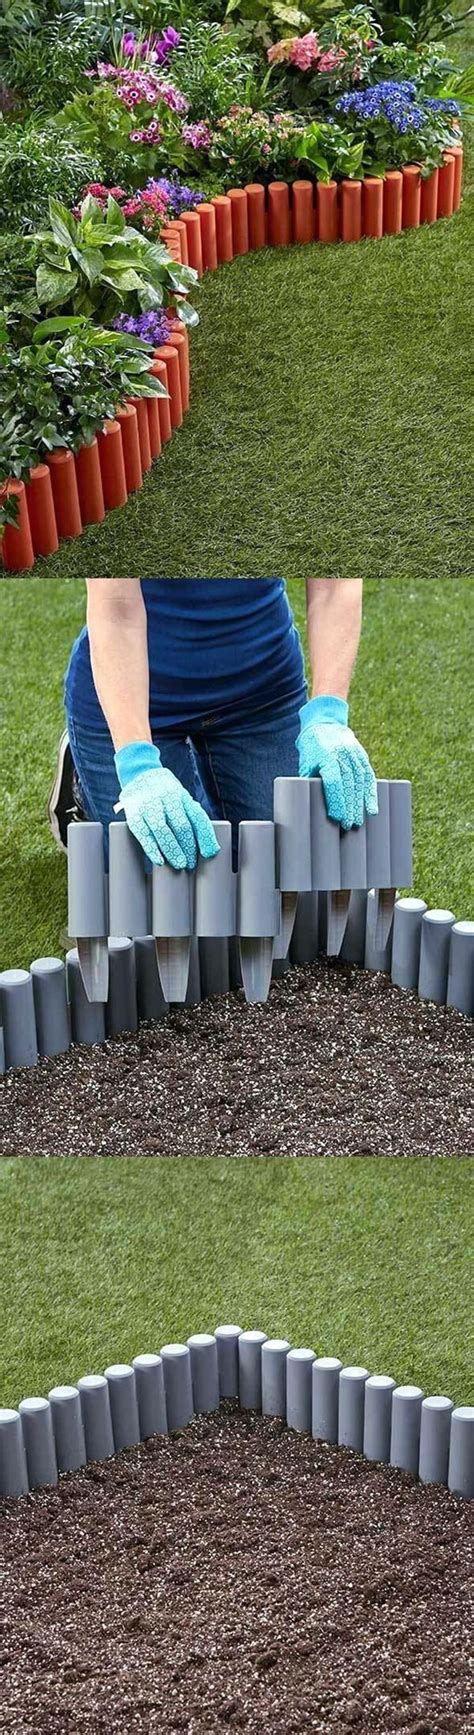 25 Unique Lawn Edging Ideas To Totally Transform Your Yard Diy Lawn